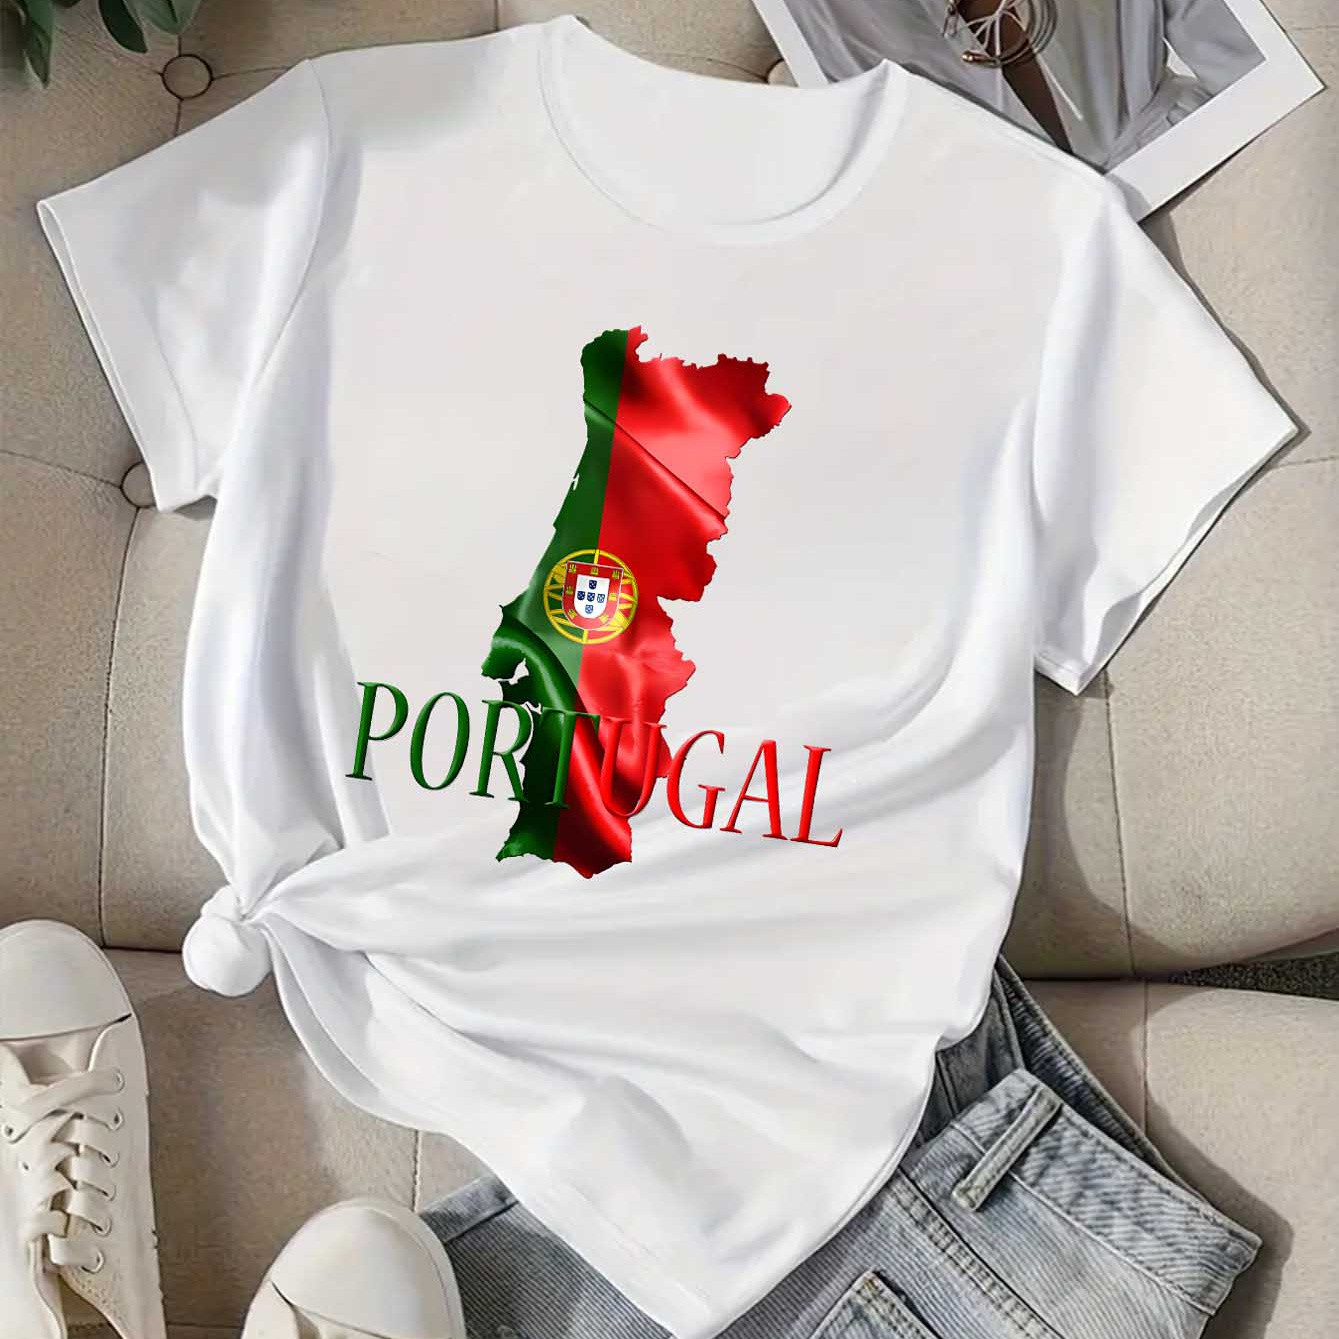 

Portugal Flag & Letter Print Casual T-shirt, Crew Neck Short Sleeves Comfy Top, Women's Activewear